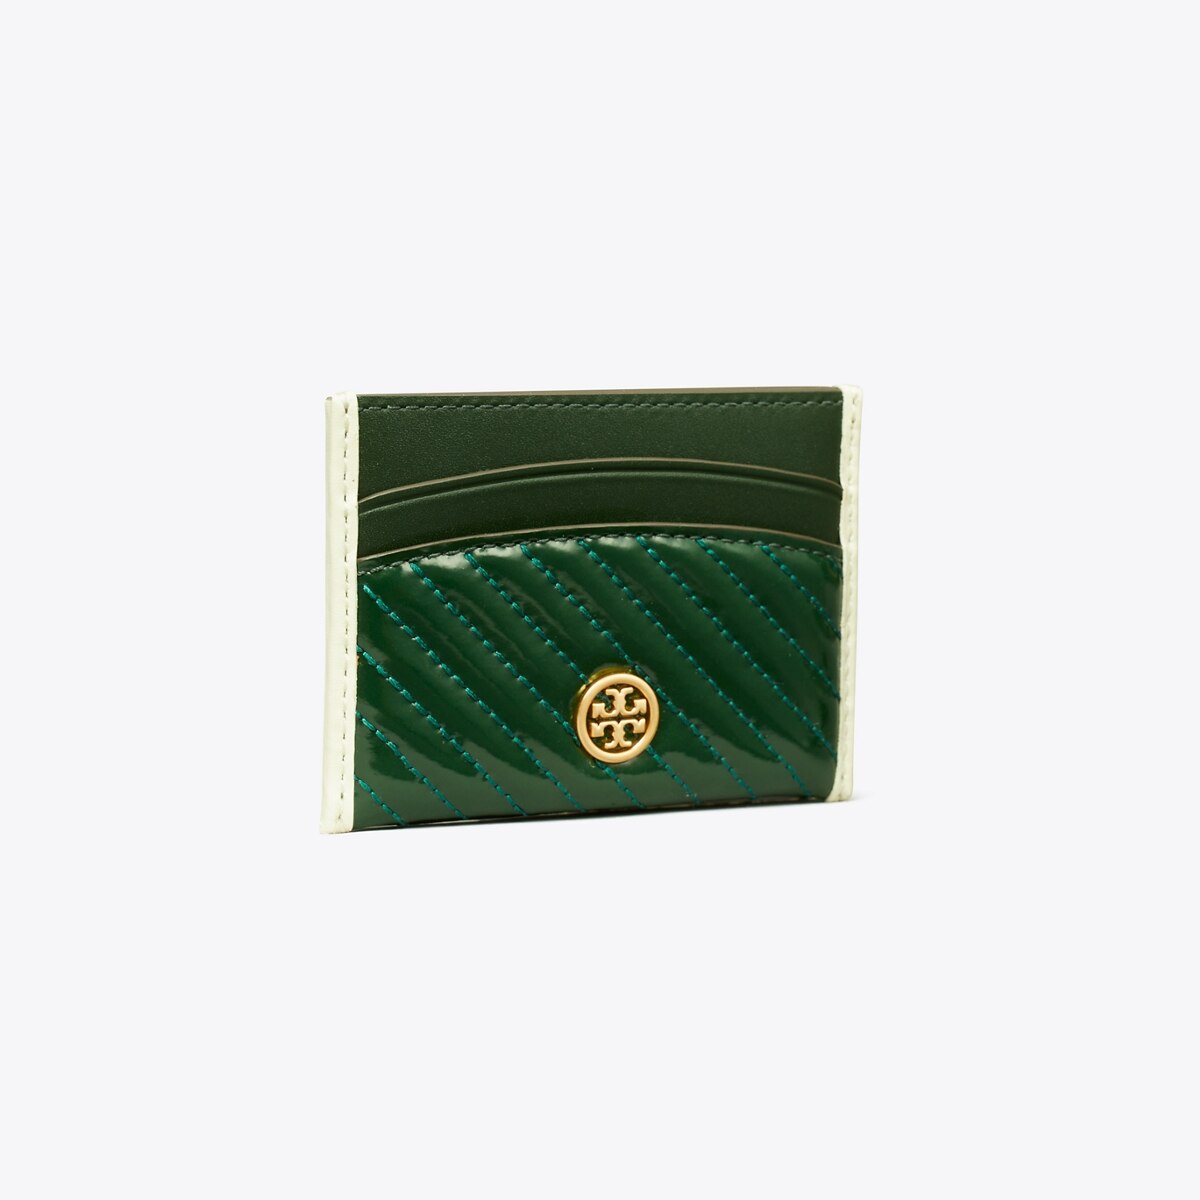 LOUIS VUITTON LOUIS VUITTON Coin card holder Case Monogram leather Pine  green Used